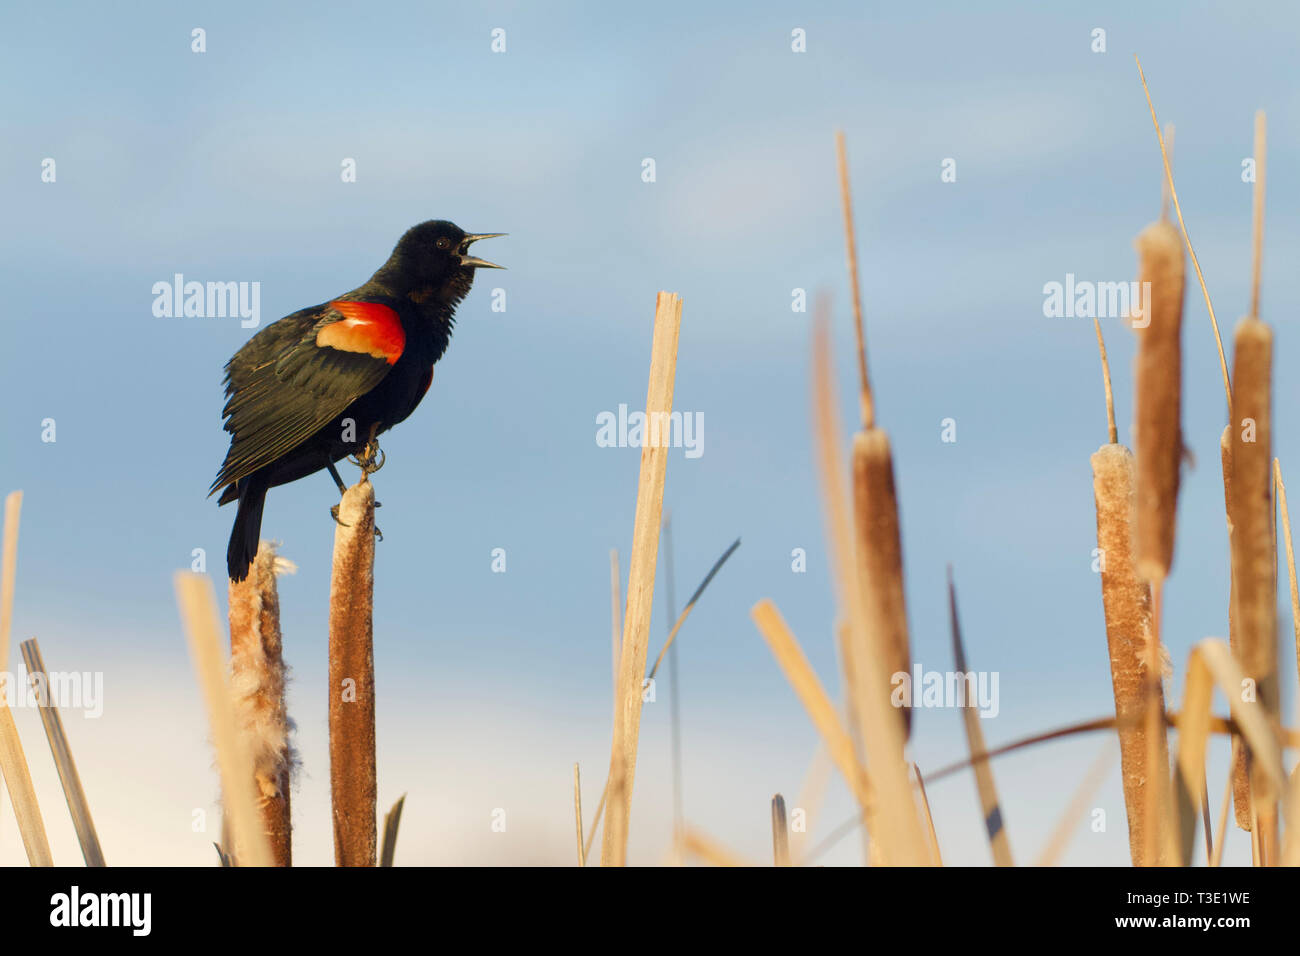 Red-winged Blackbird performing mating display and song on cattails in wetland marsh habitat Stock Photo